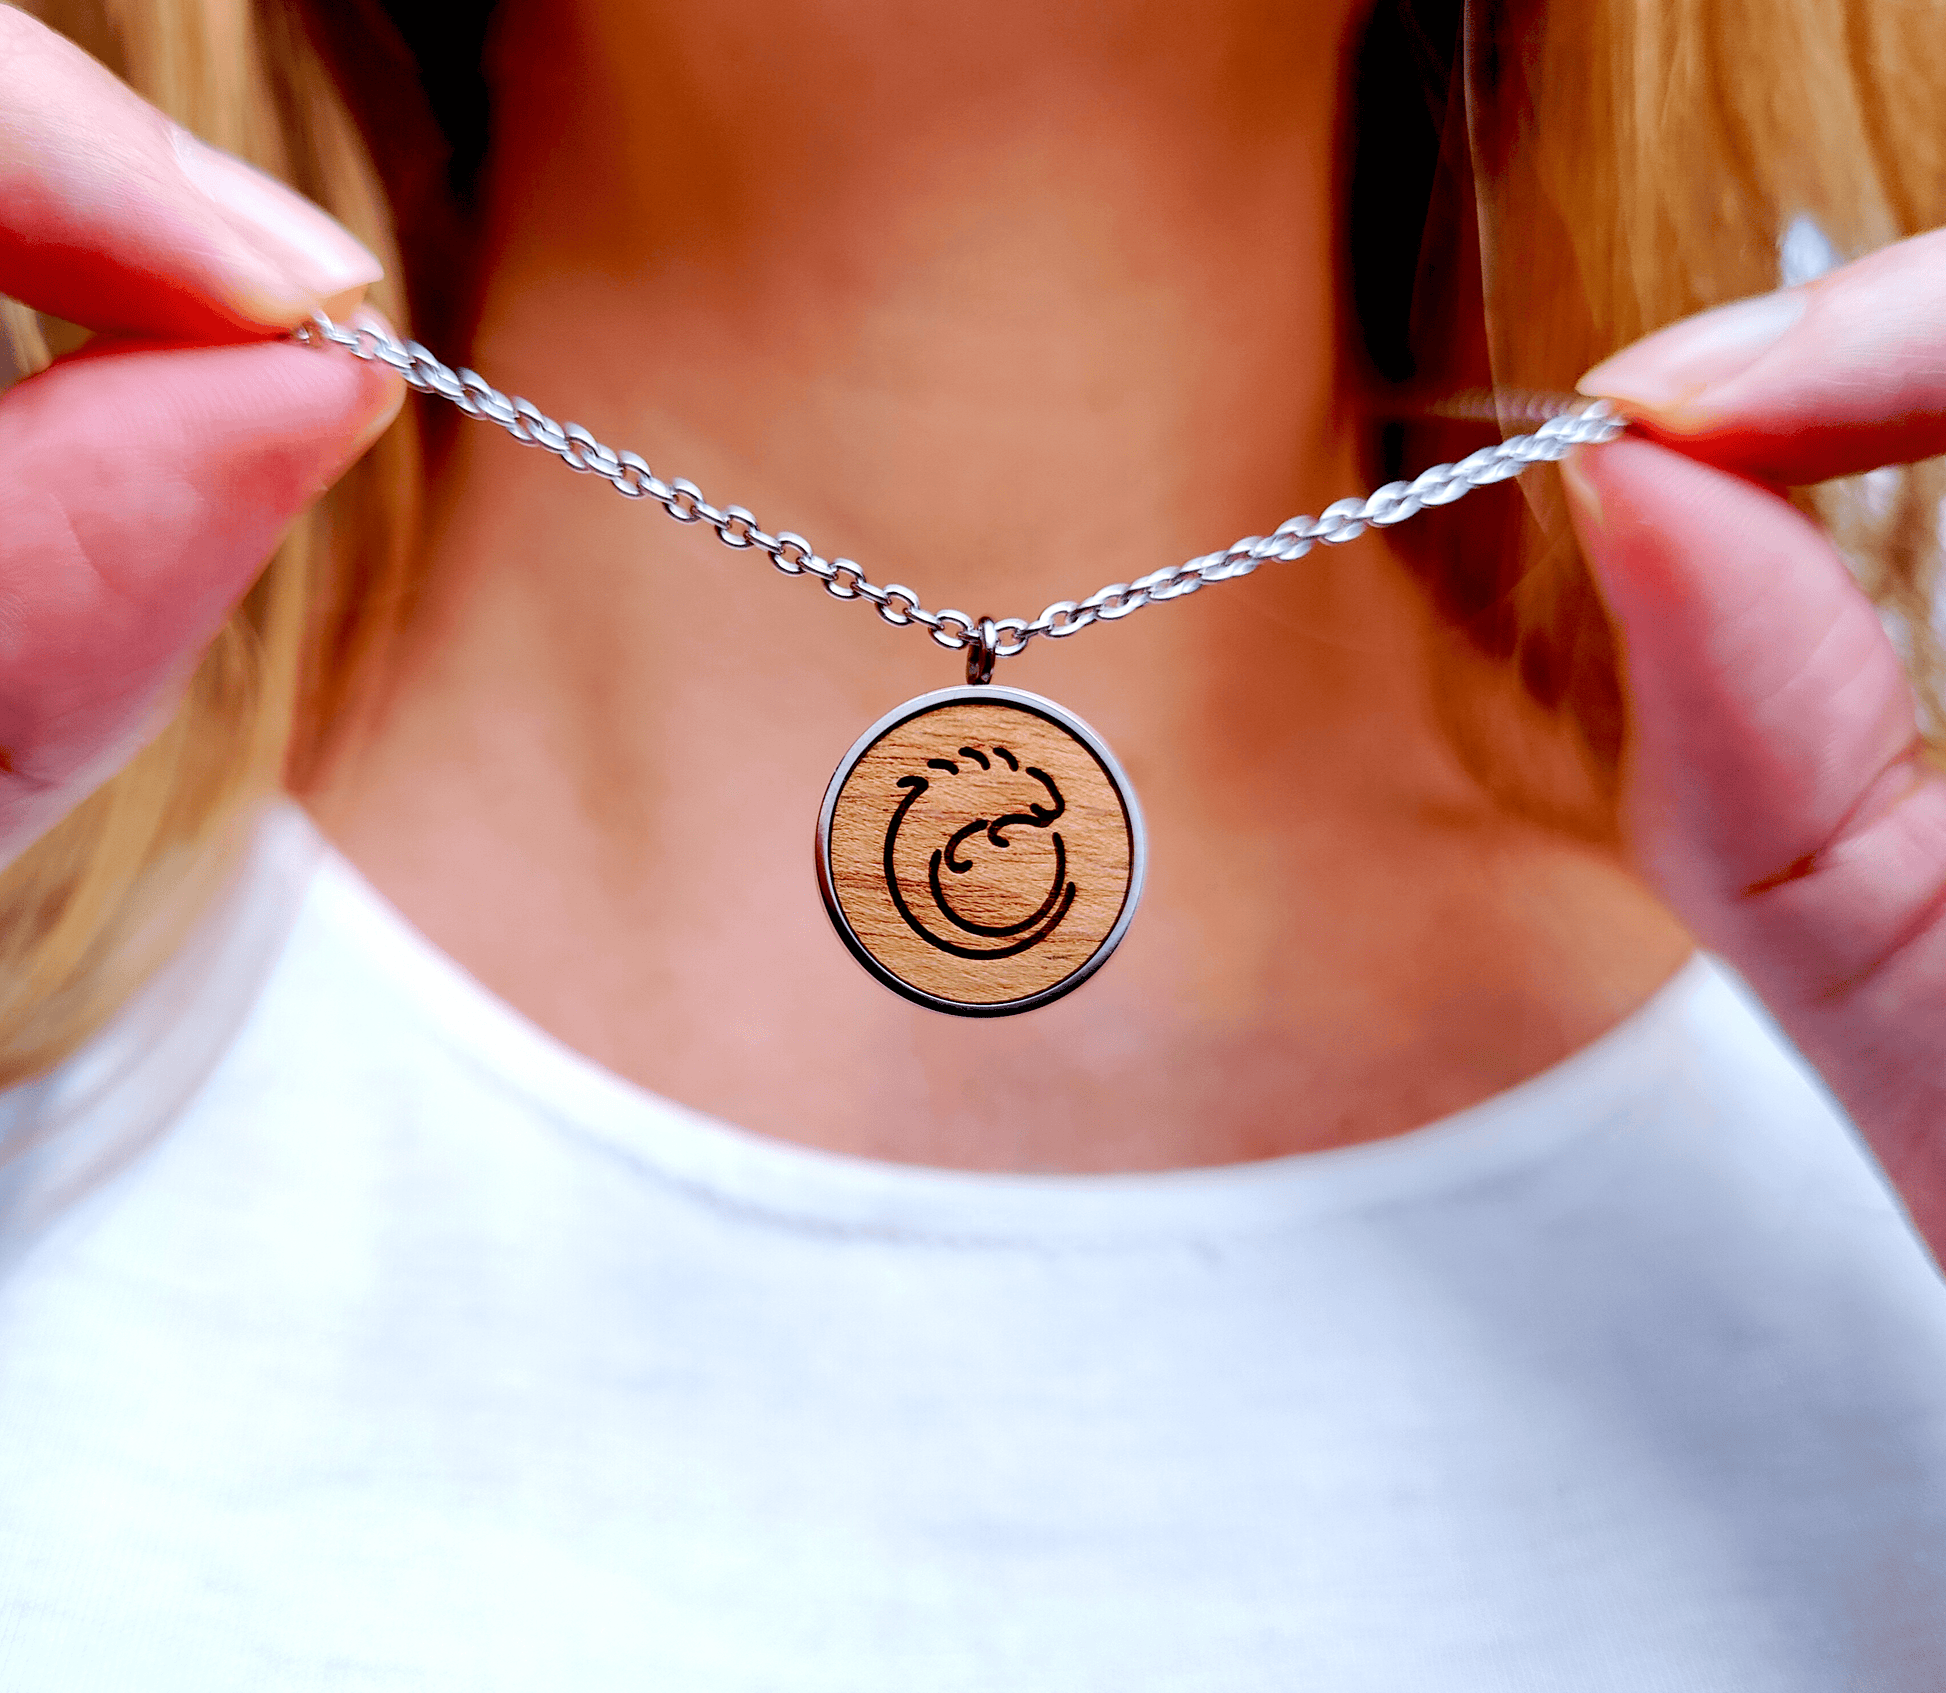 Nut wood iguana pendant necklace with stainless steel chain.  All our eco-friendly necklaces are delivered in FSC certified jewelry boxes with sustainable foam.